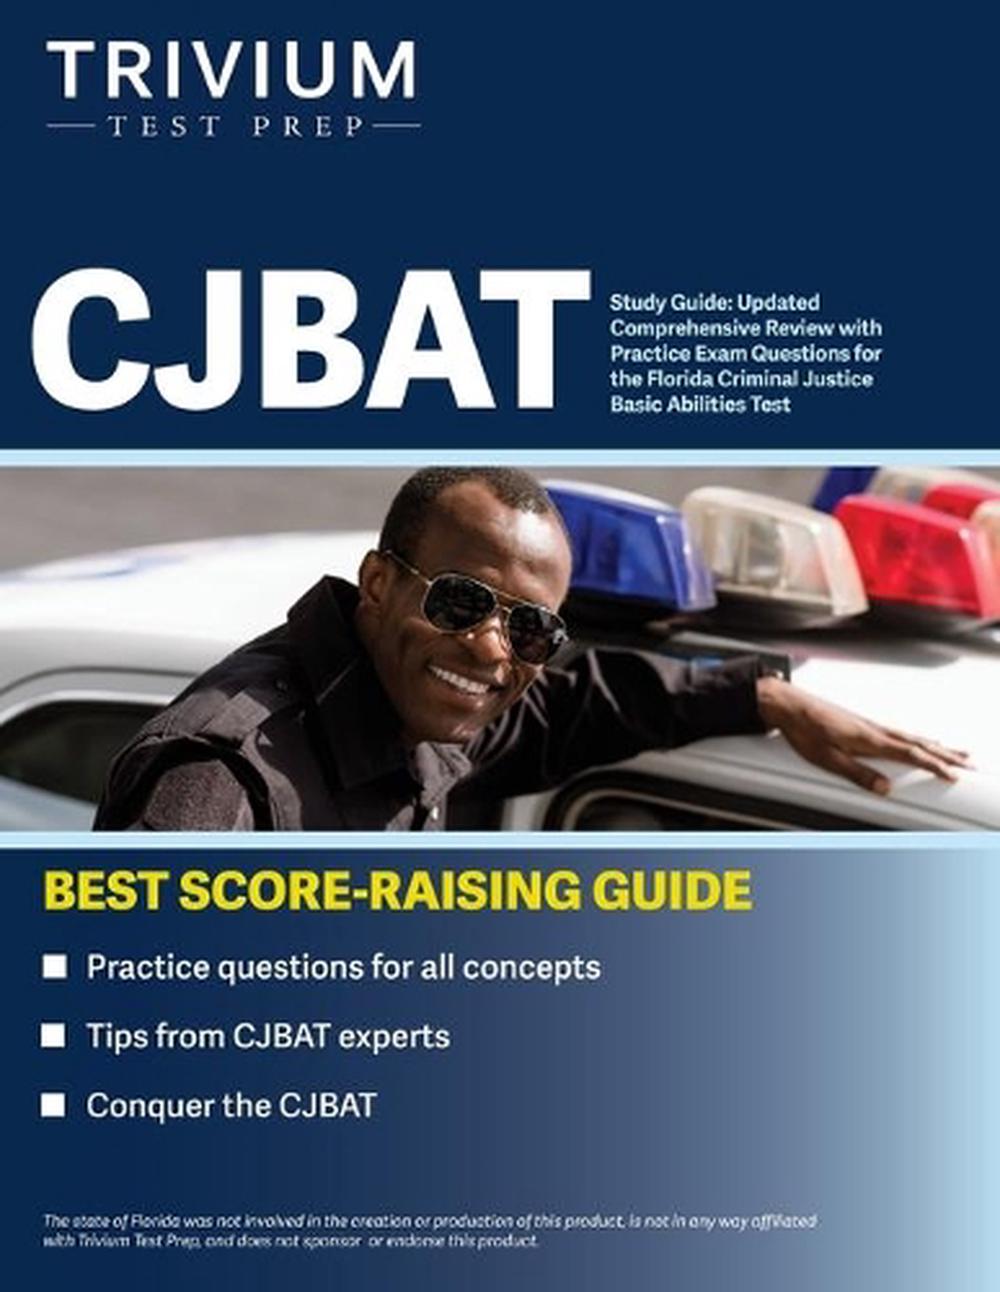 cjbat-study-guide-updated-comprehensive-review-with-practice-exam-questions-for-the-florida